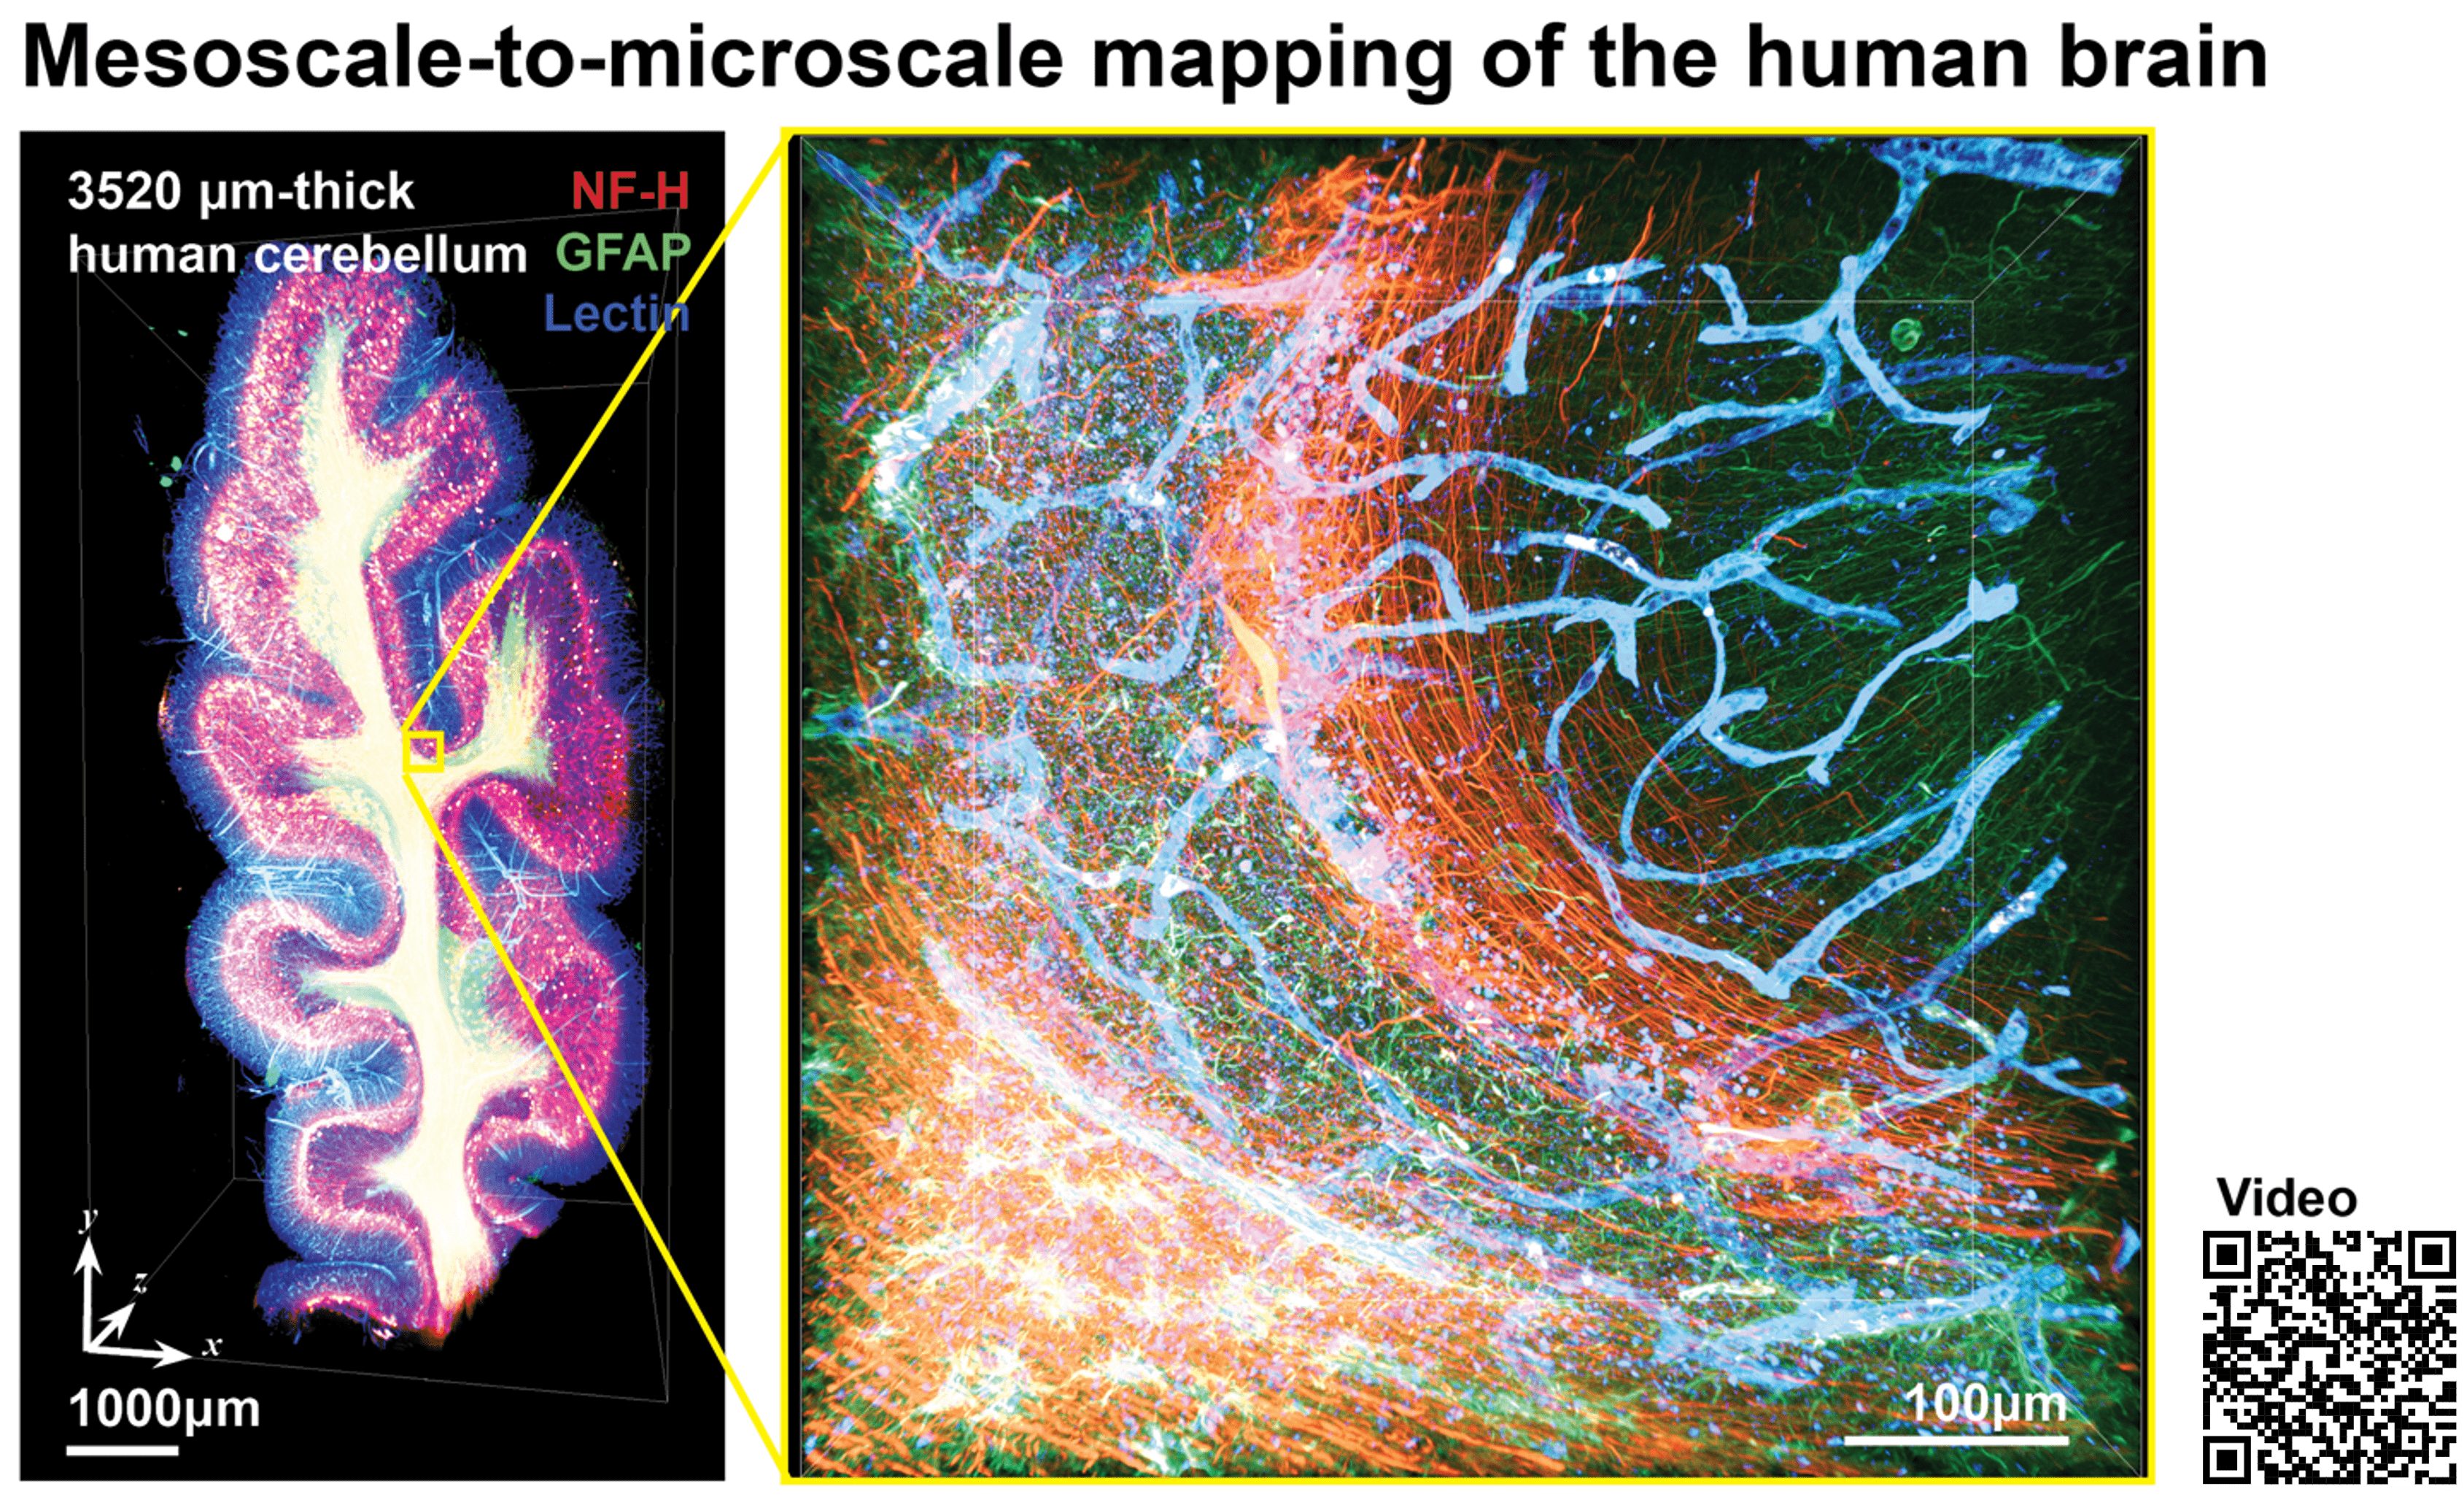 Next Generation Histology method for scalable 3D multiplexed mapping of tissues